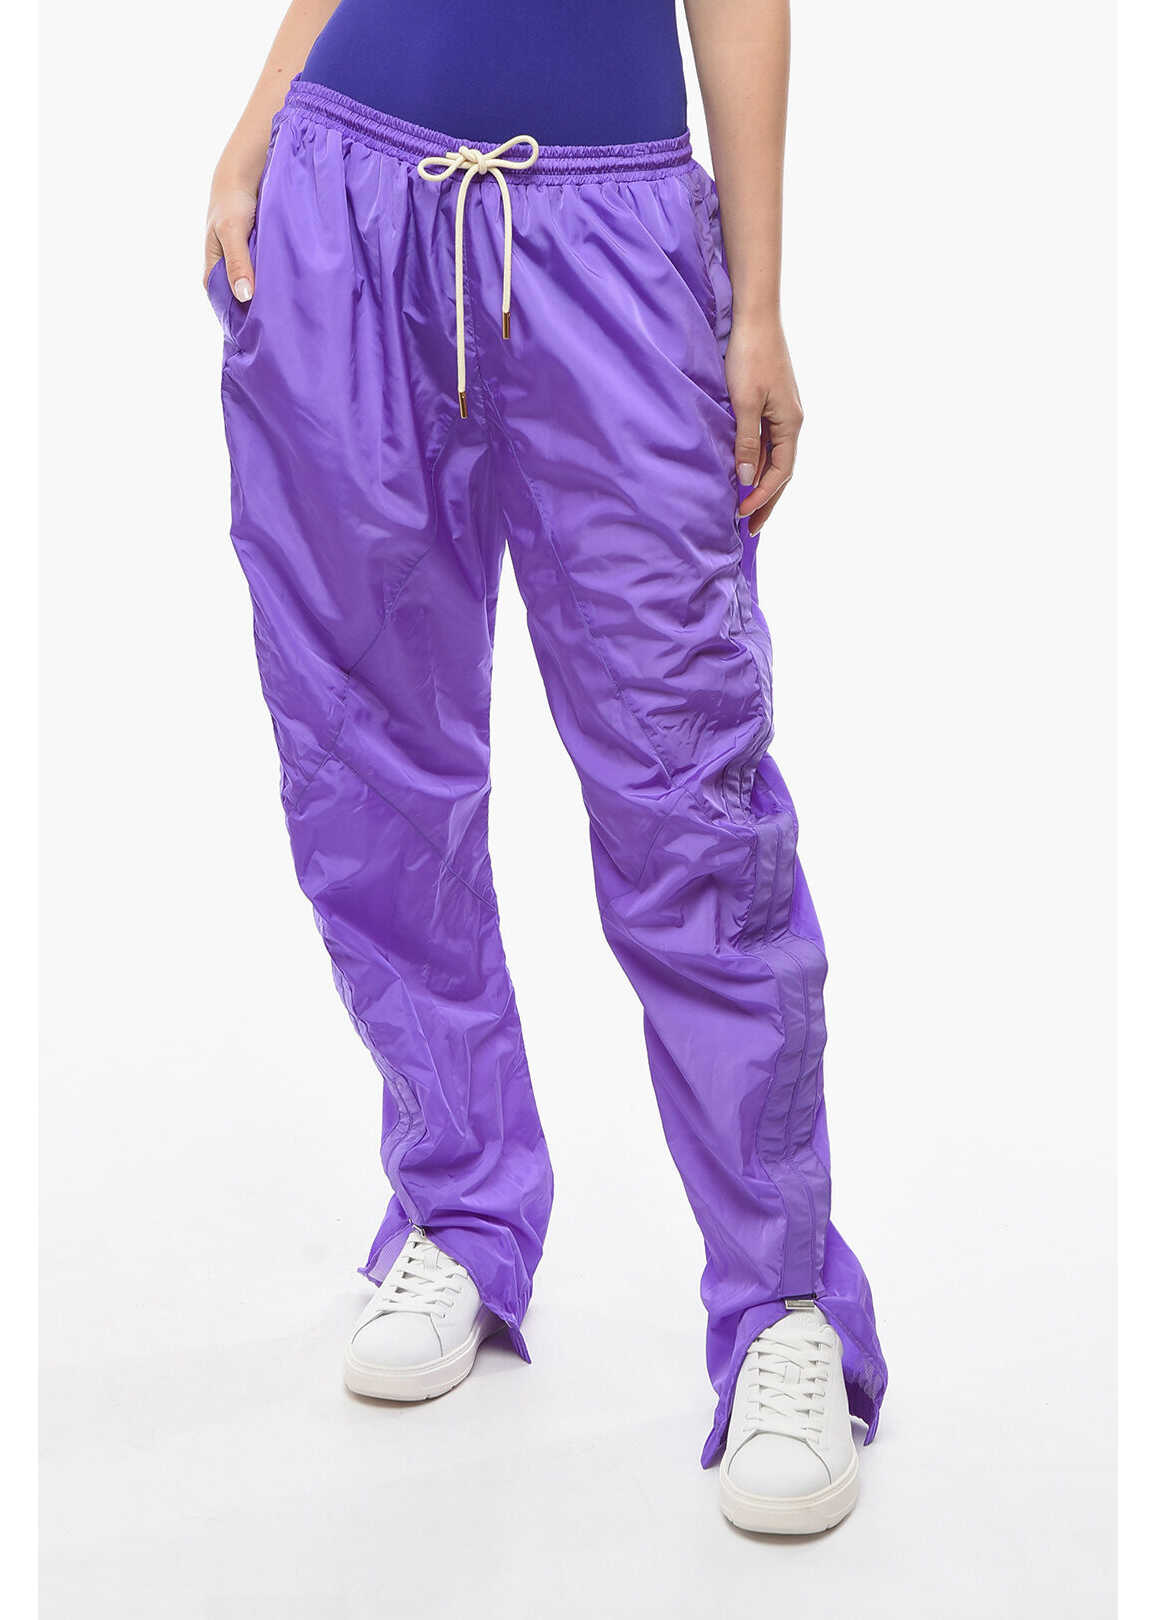 KhrisJoy Nylon Joggers With Ruffled Side-Detailing Violet